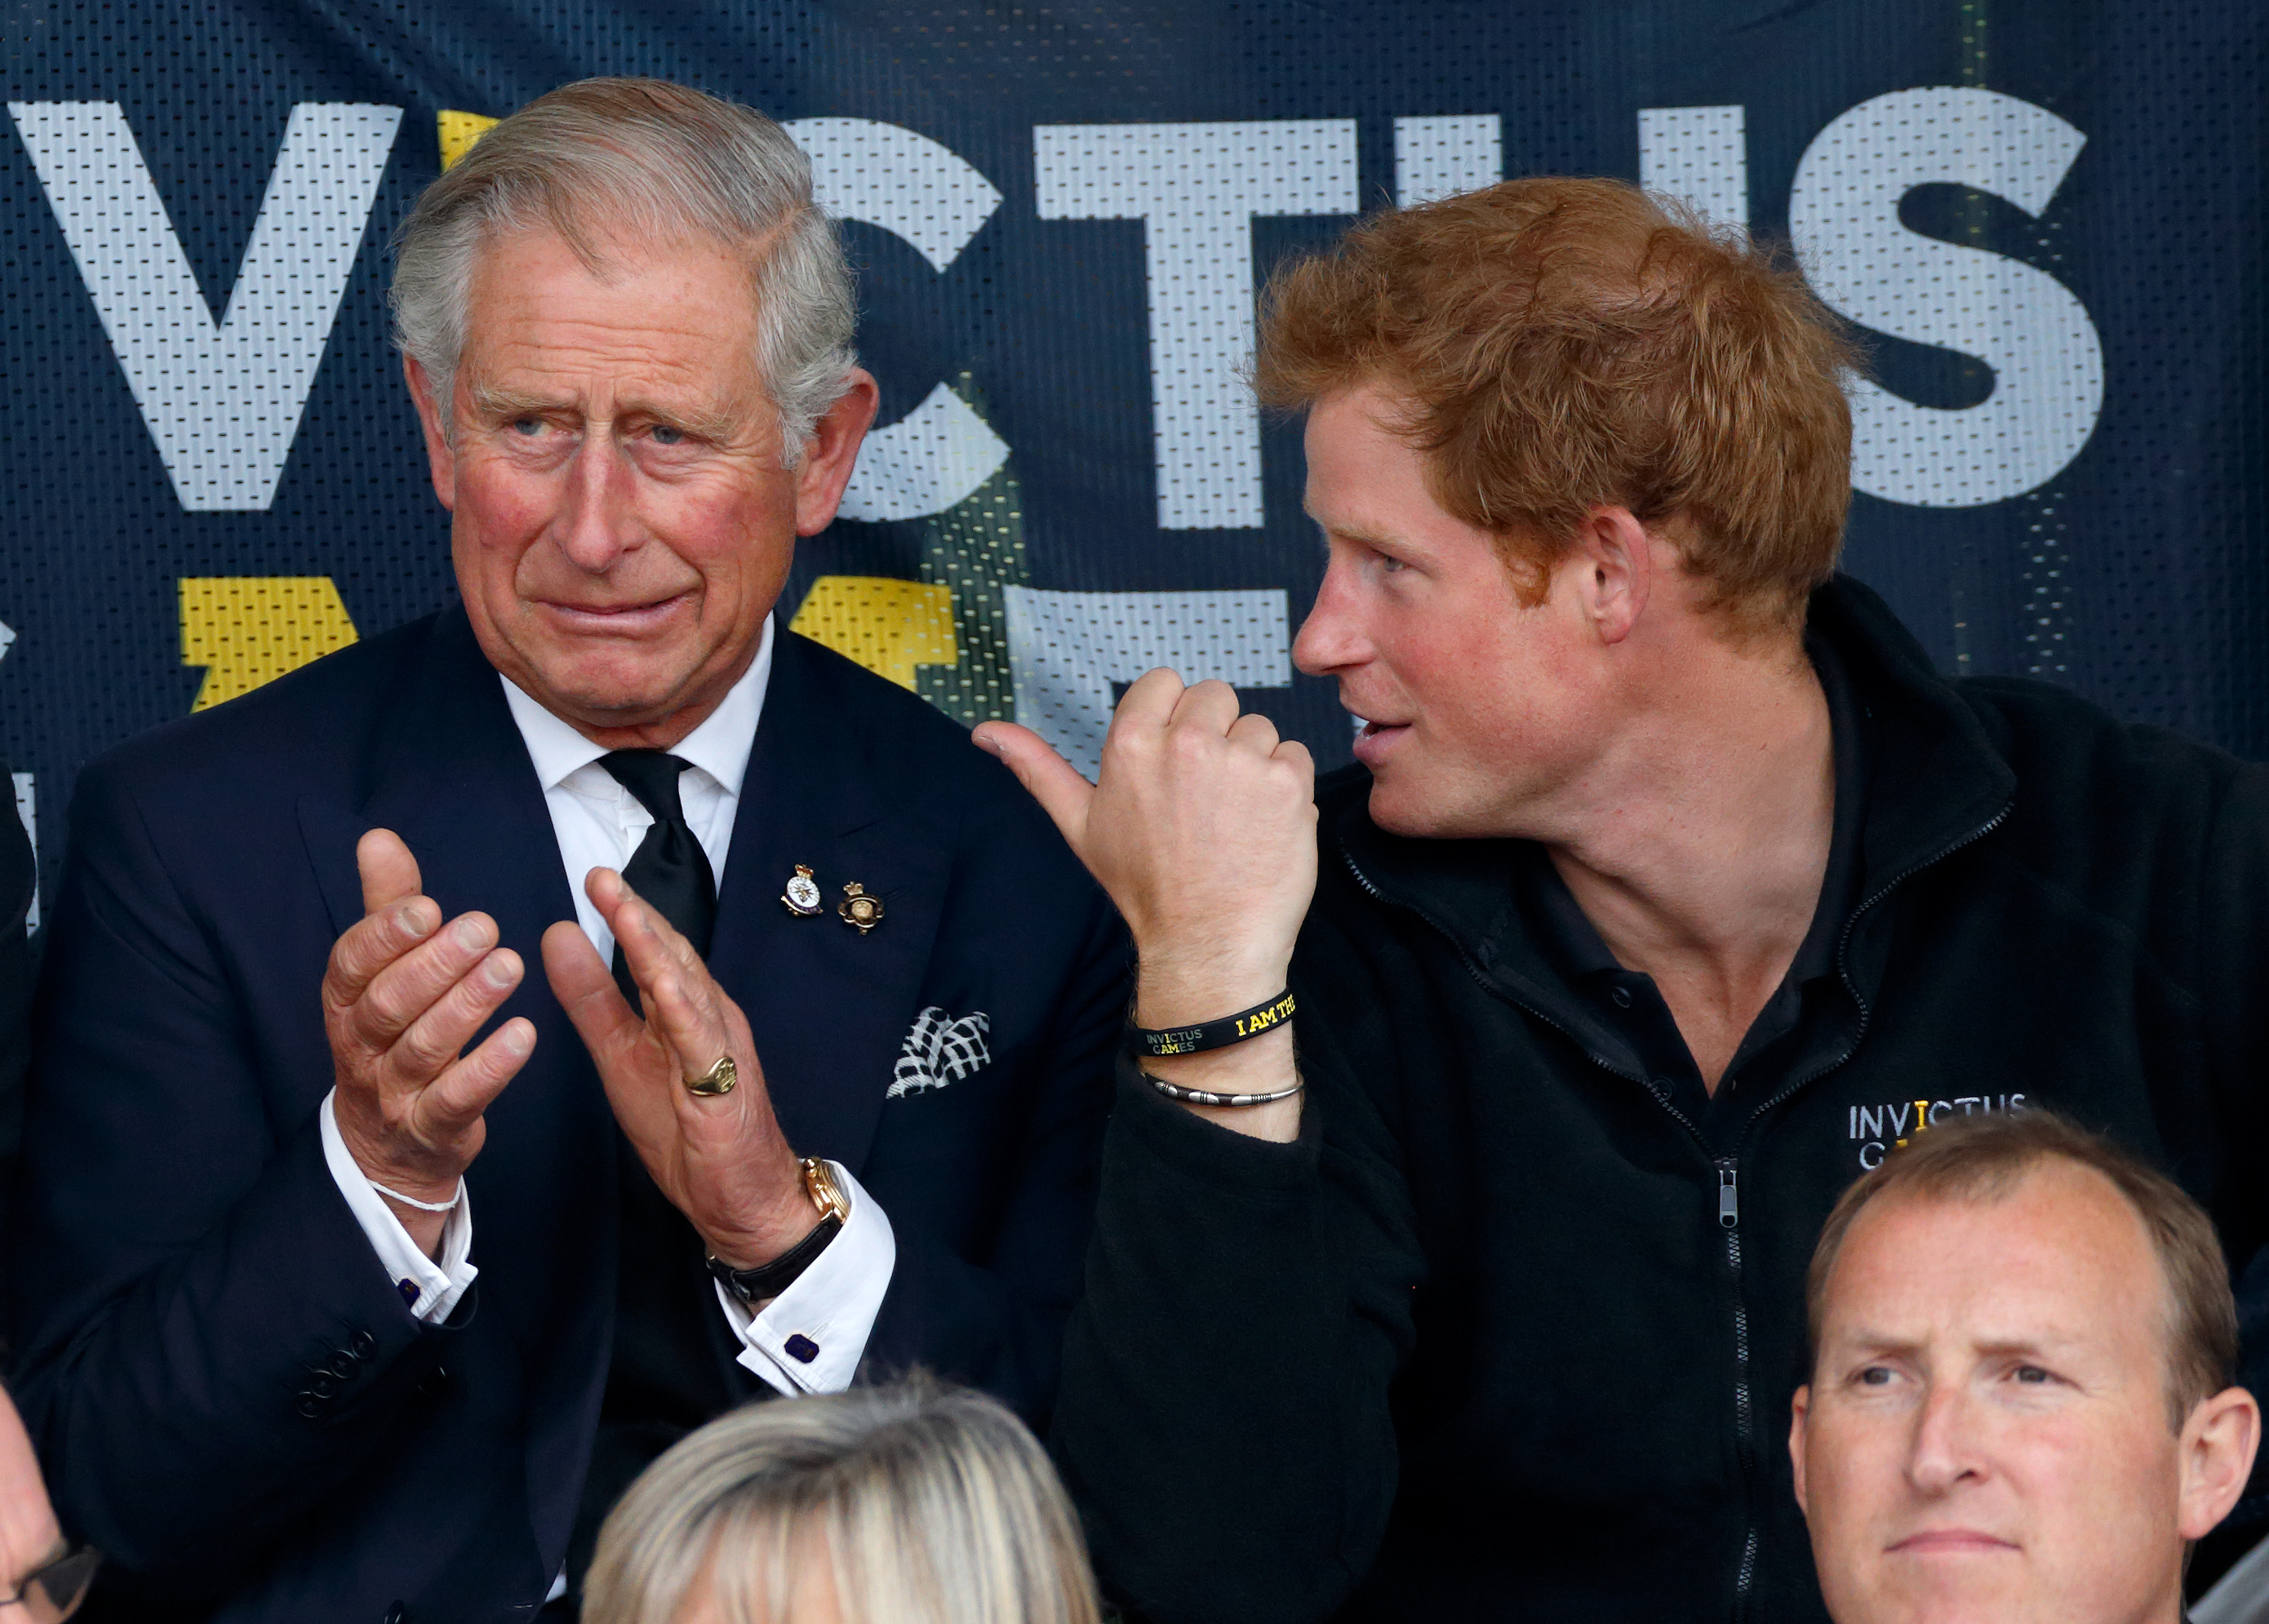 King Charles III and Prince Harry during the Invictus Games in London, England on September 11, 2014 | Source: Getty Images